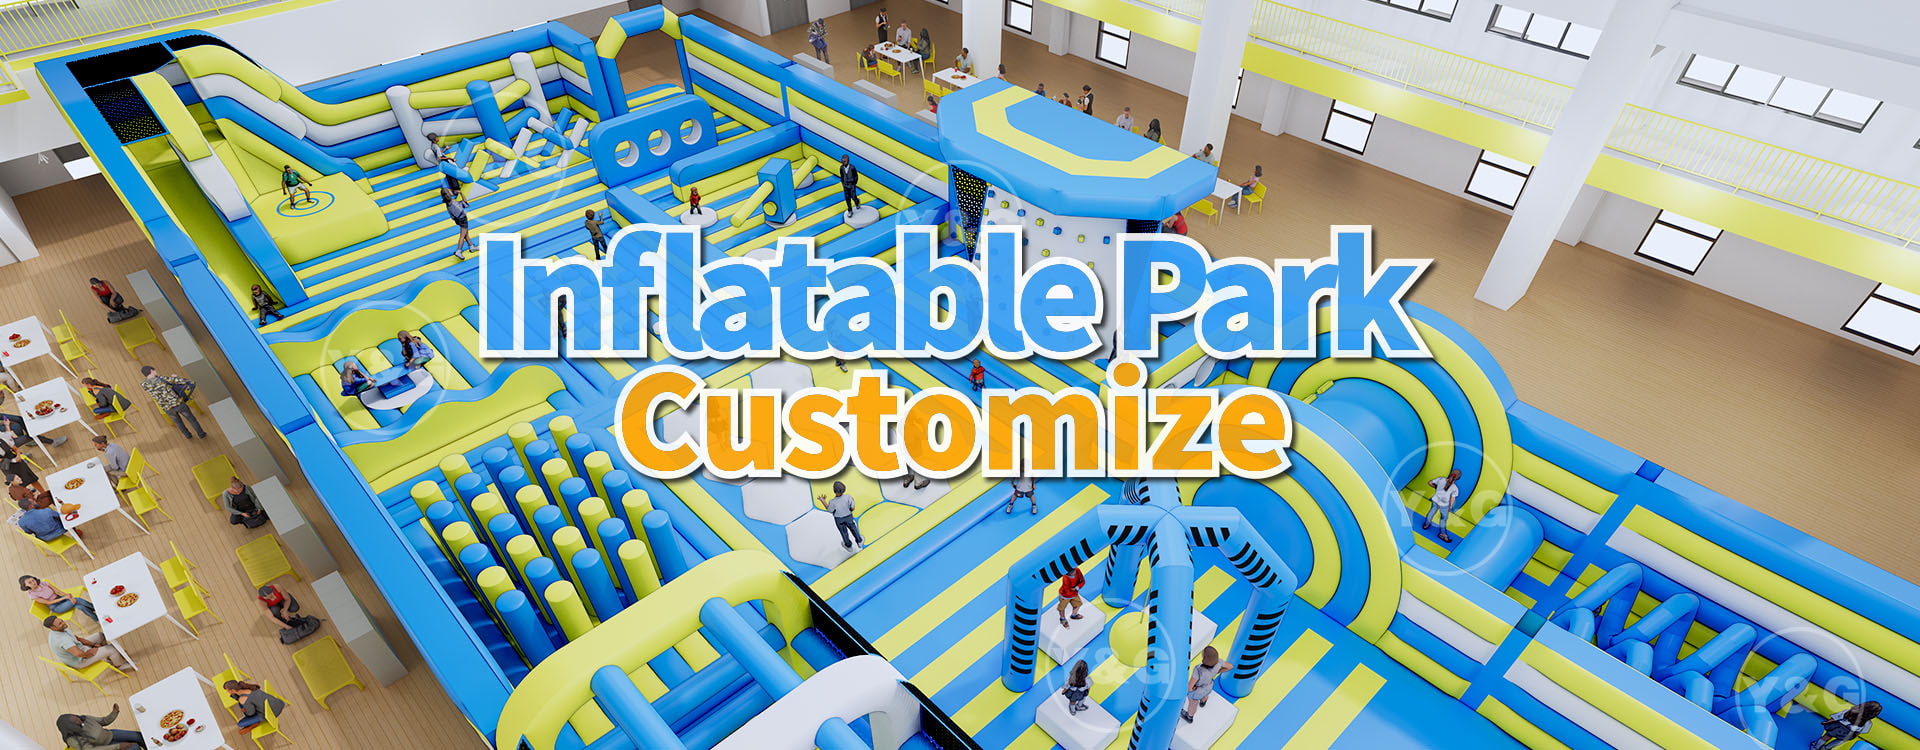 Inflatable Park Customize